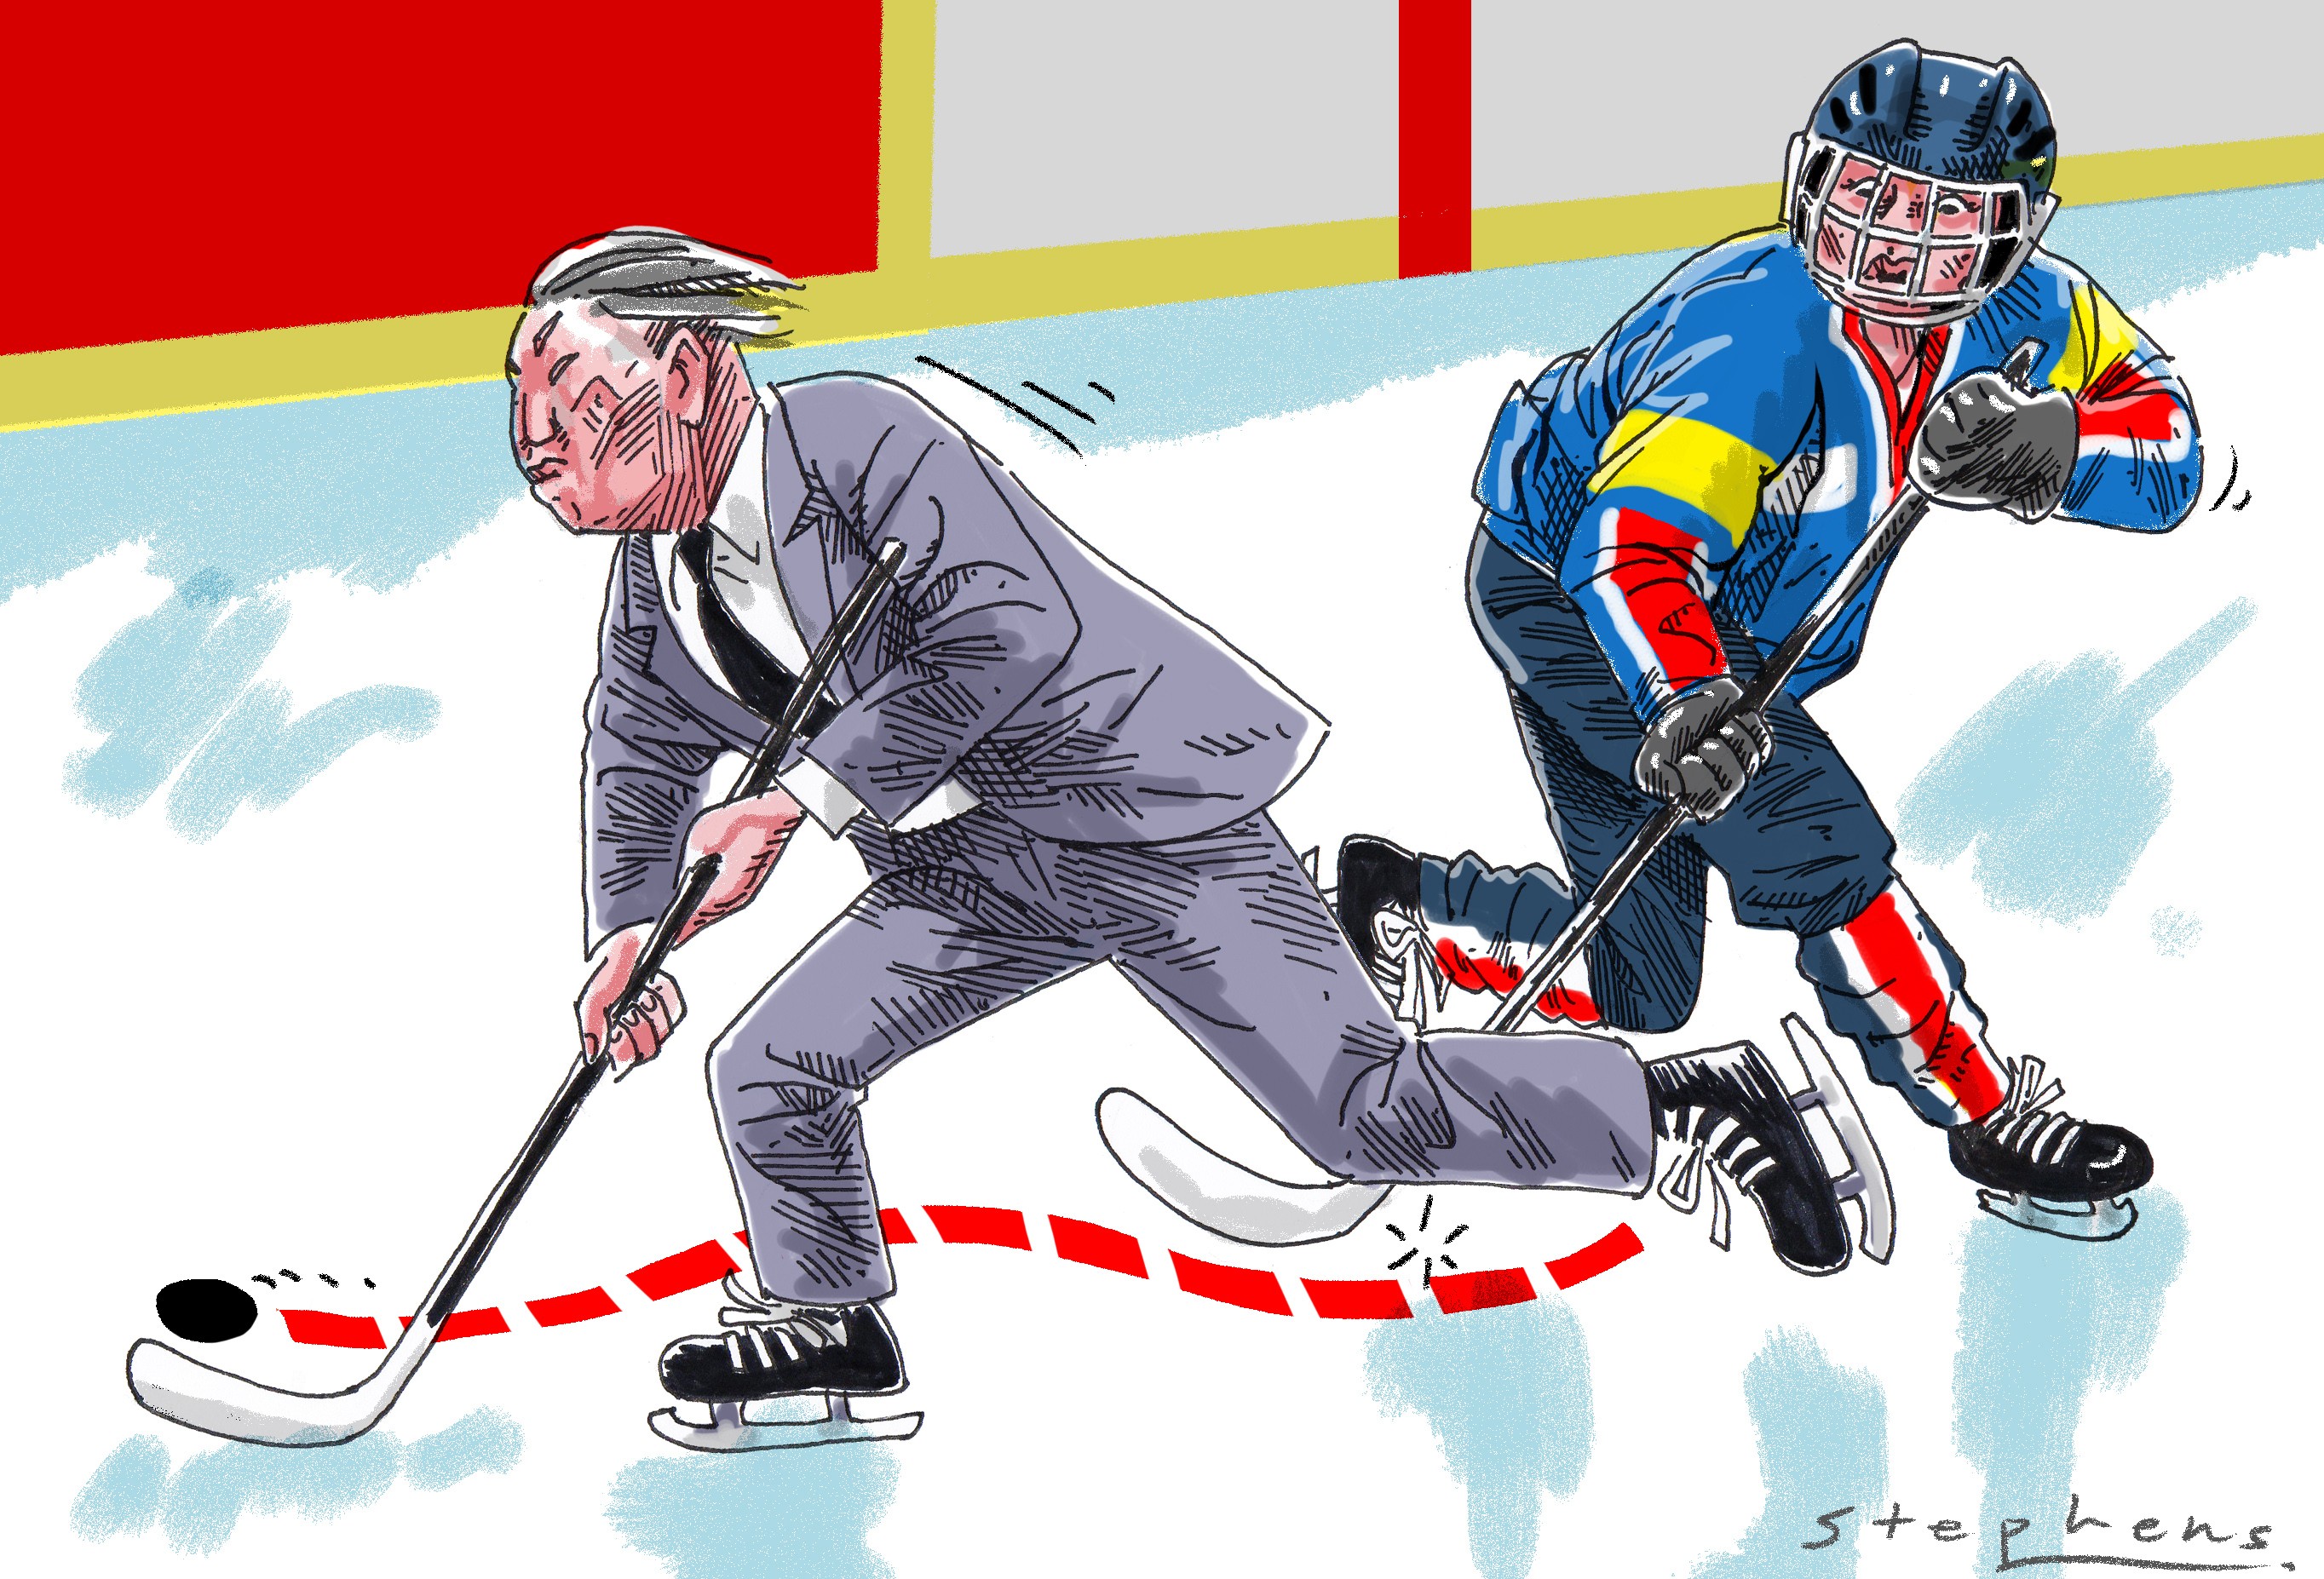 As the recent manoeuvring surrounding the North Korean participation in the Pyeongchang Games suggest, sport in the Korean context still cannot be separated from politics. Illustration: Craig Stephens